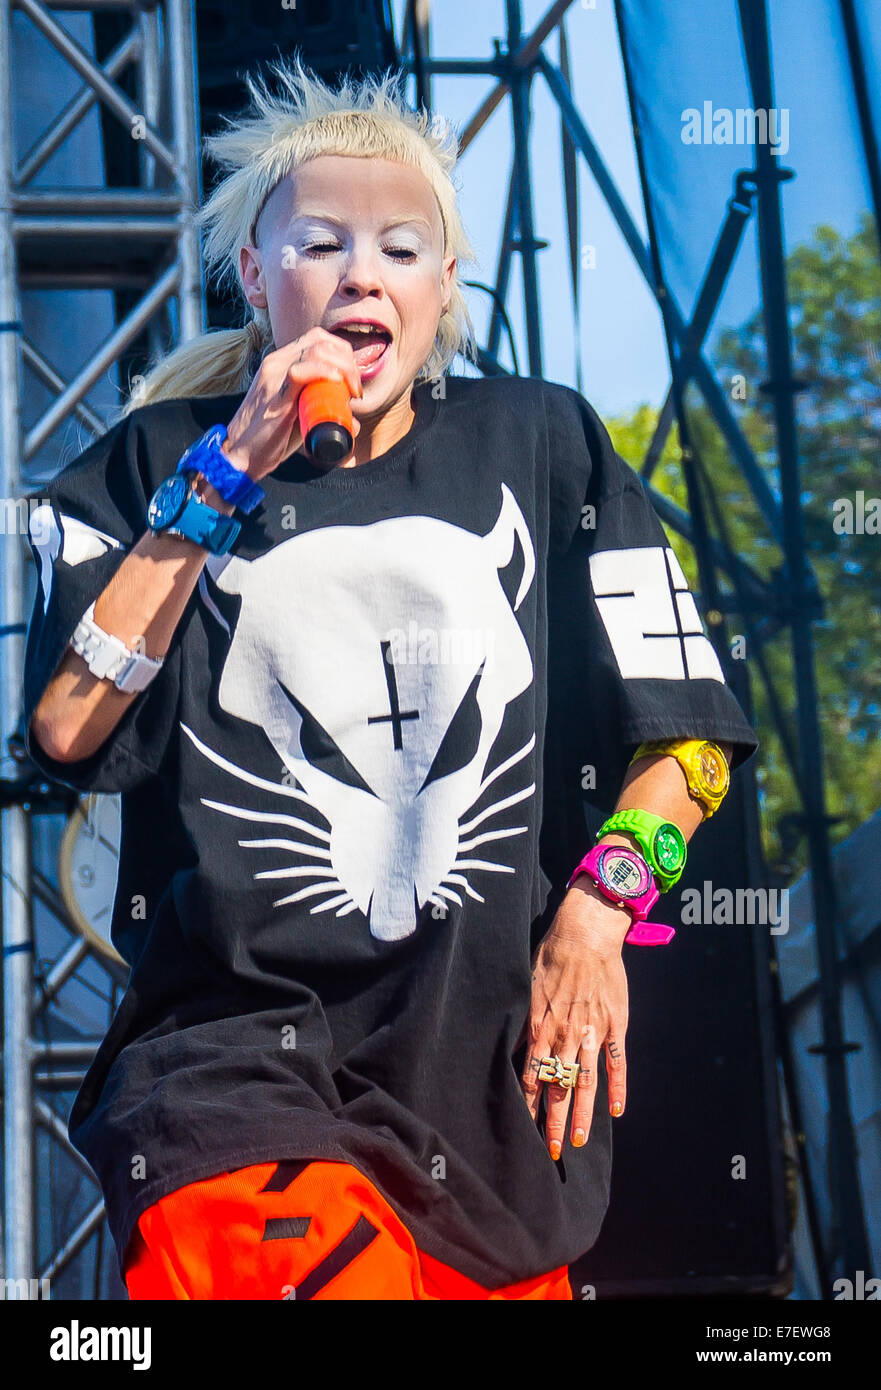 Chicago, IL, USA. 13th Sep, 2014. Die Antwoord performs at Riot Fest 2014 in Chicago, IL. © Alexis Simpson/ZUMA Wire/Alamy Live News Stock Photo